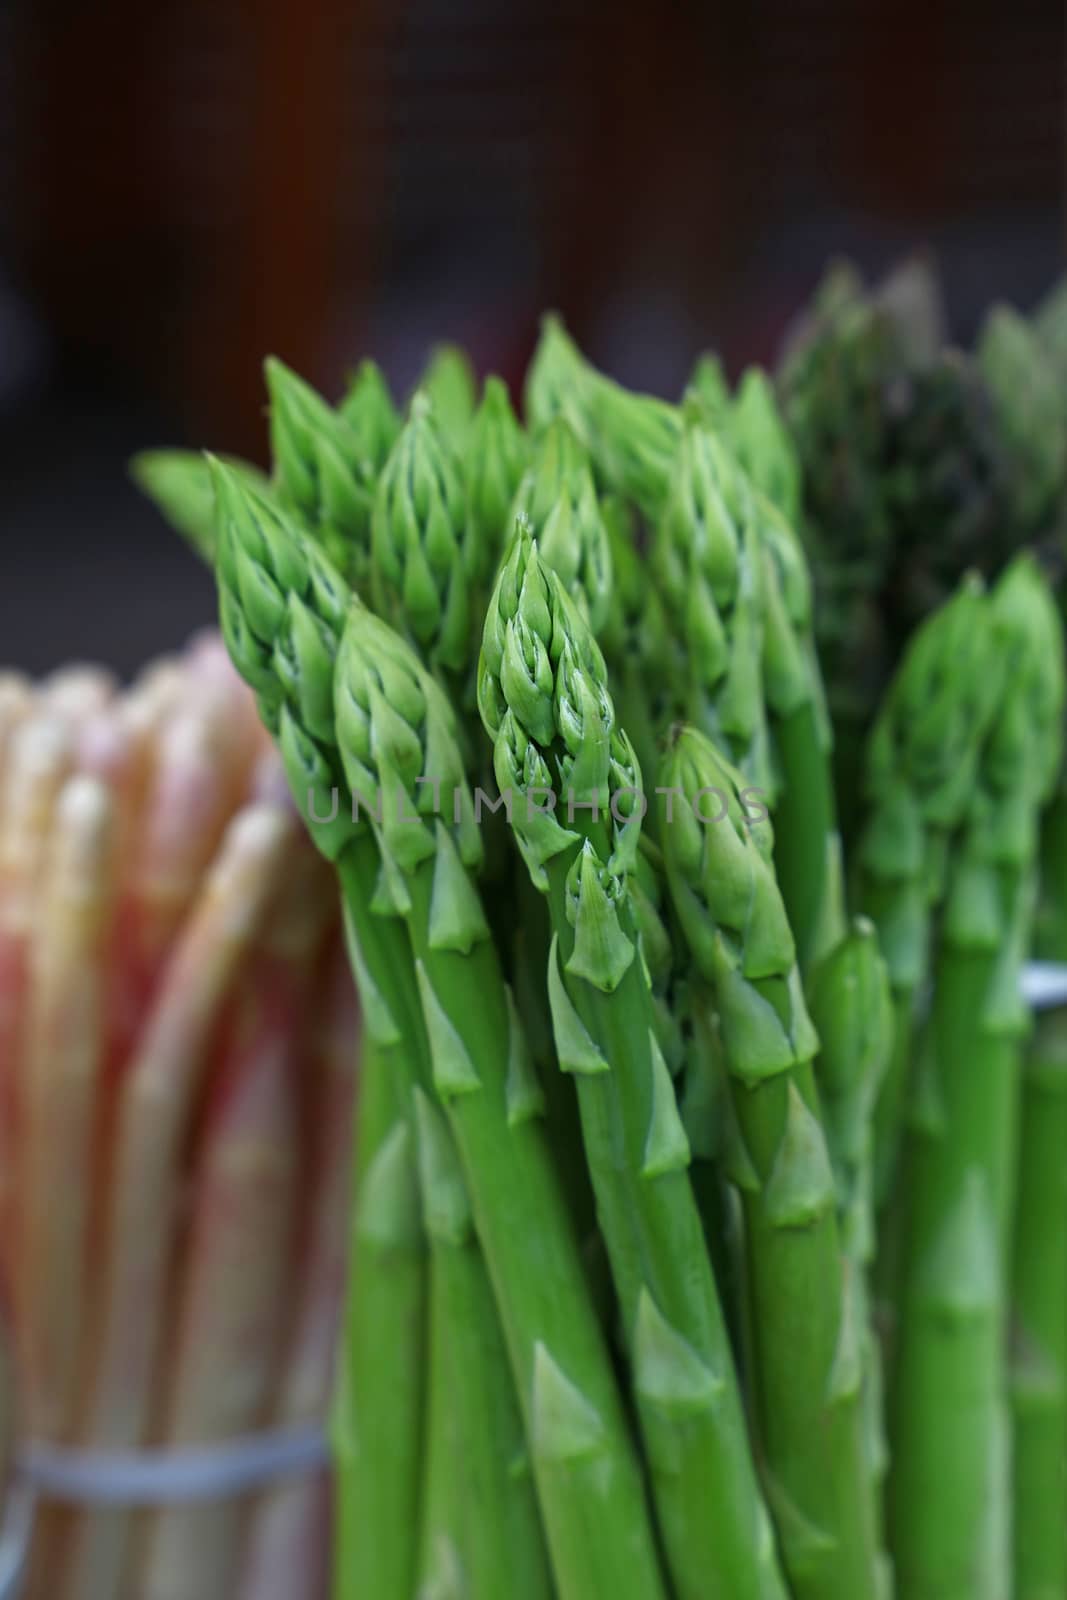 Bundle bunch of fresh green garden asparagus shoots close up, elevated high angle view